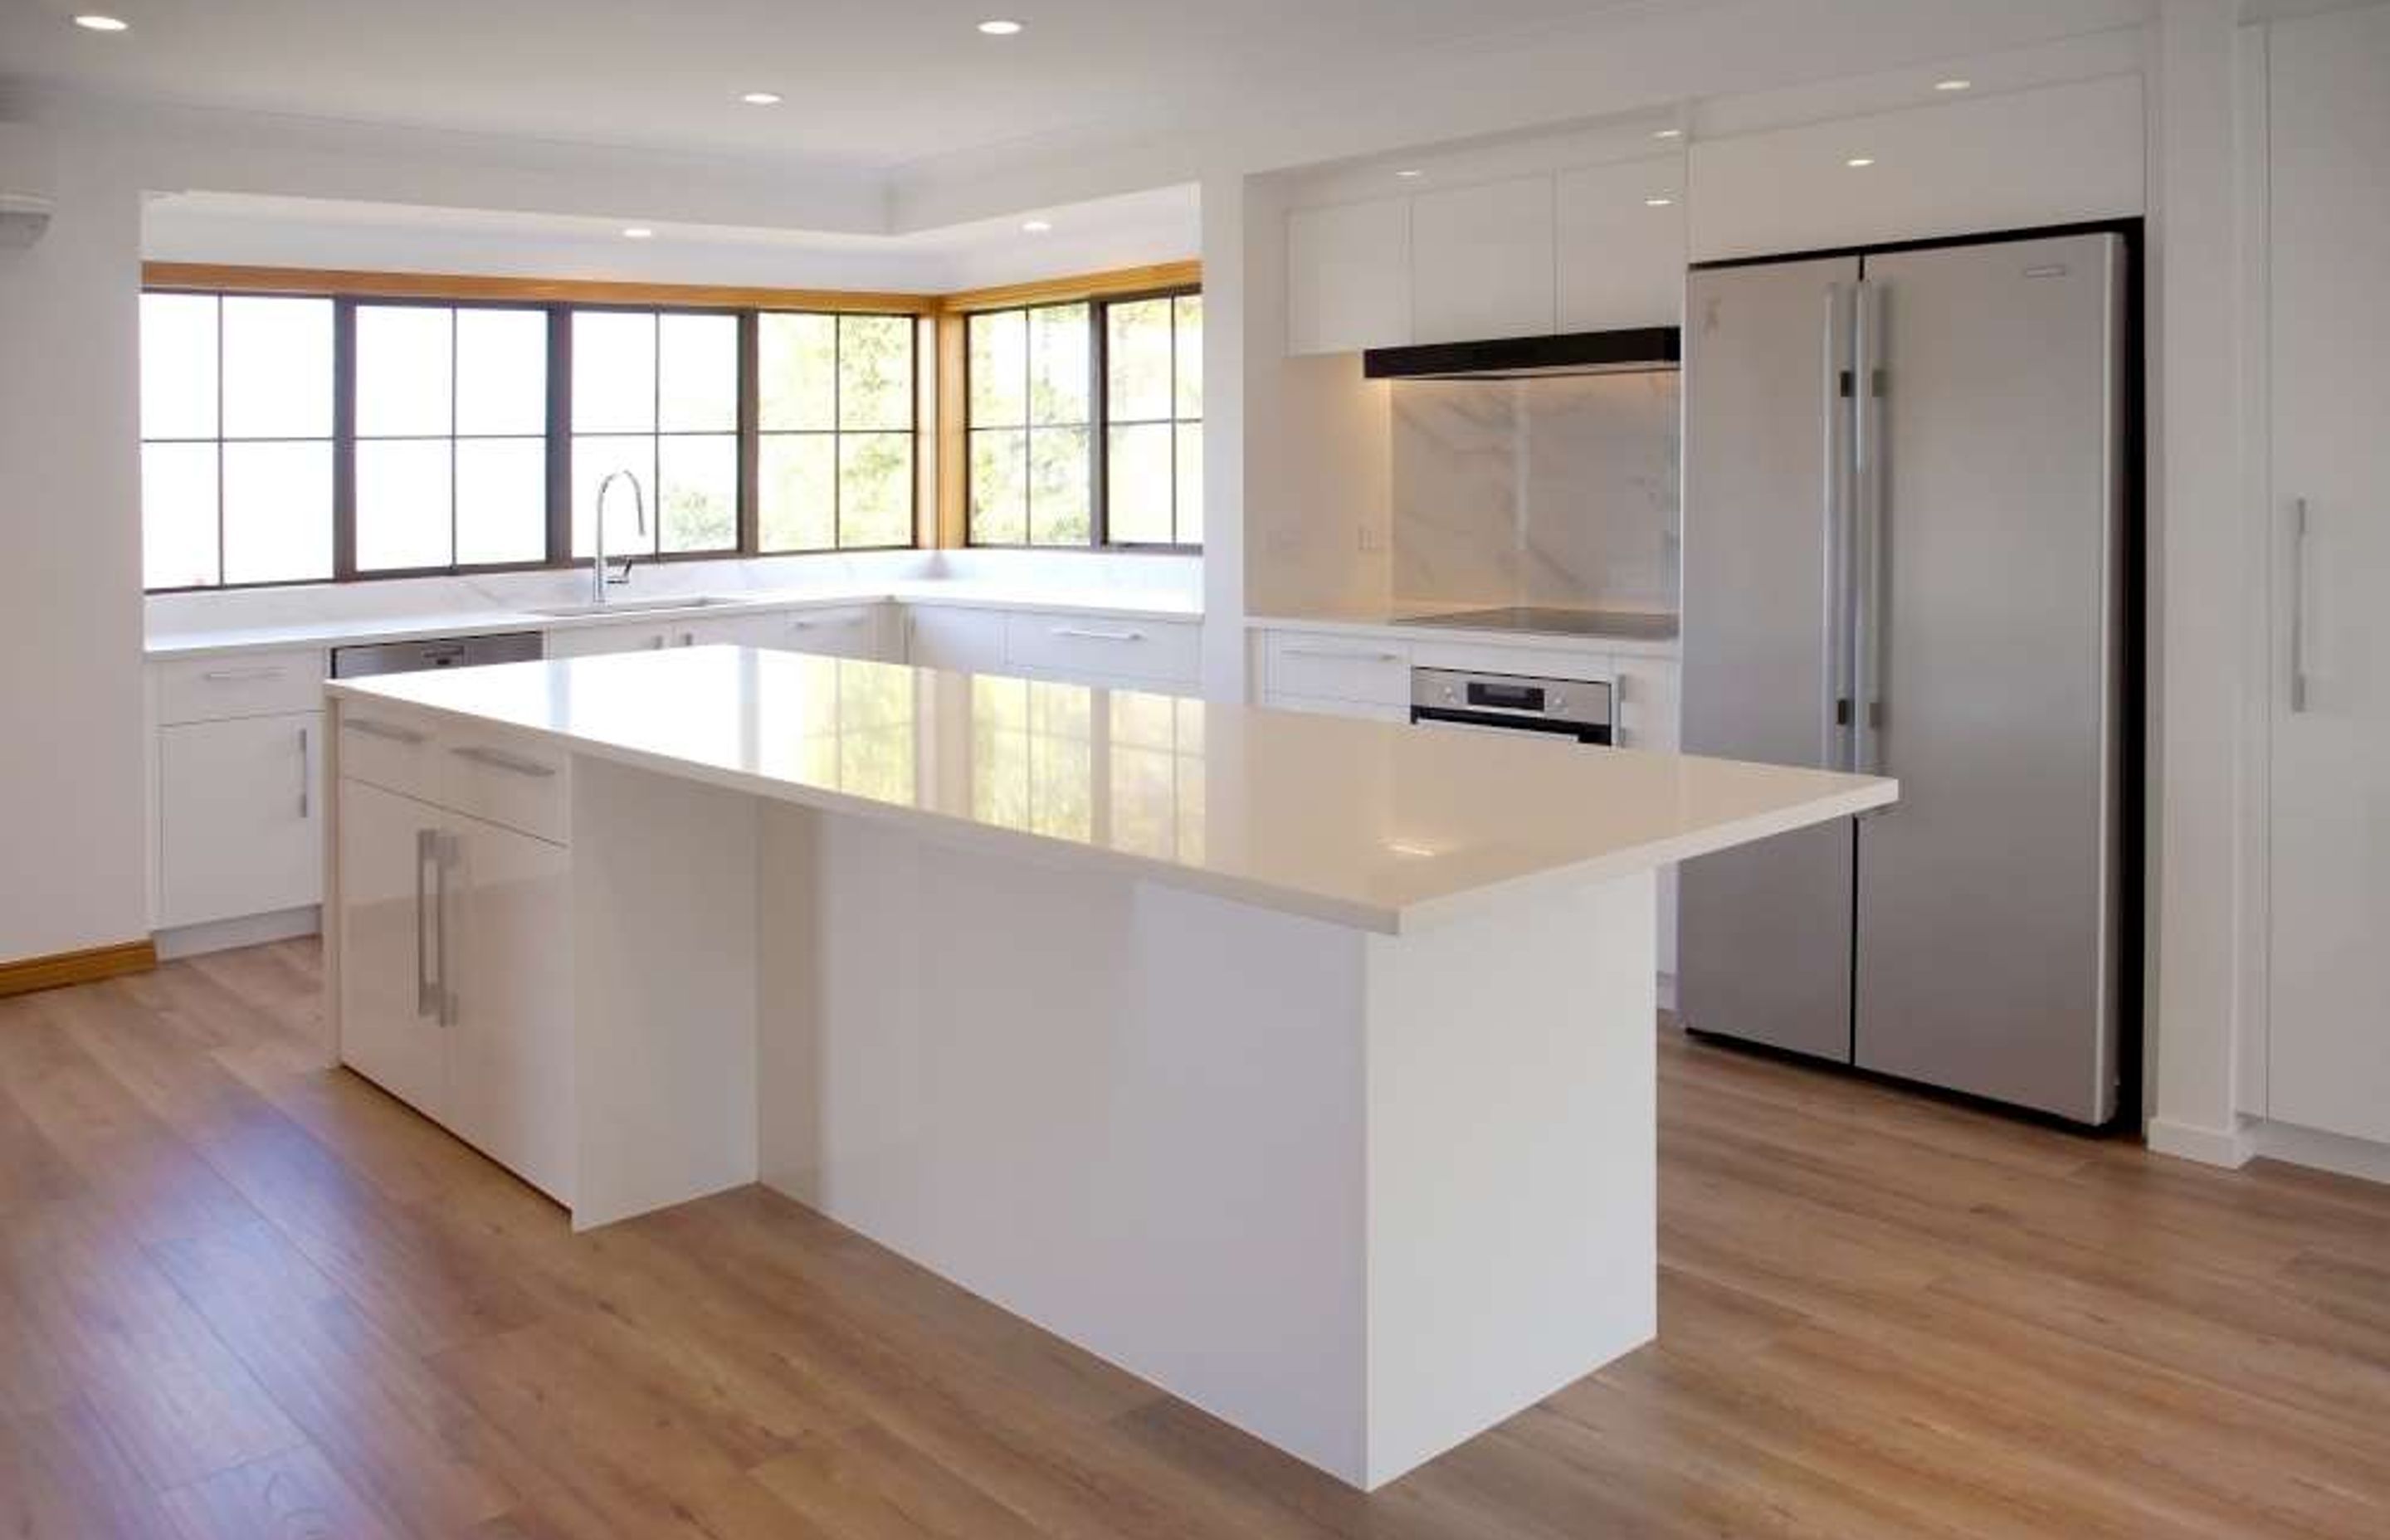 Kitchen renovation in Blockhouse Bay for a family home